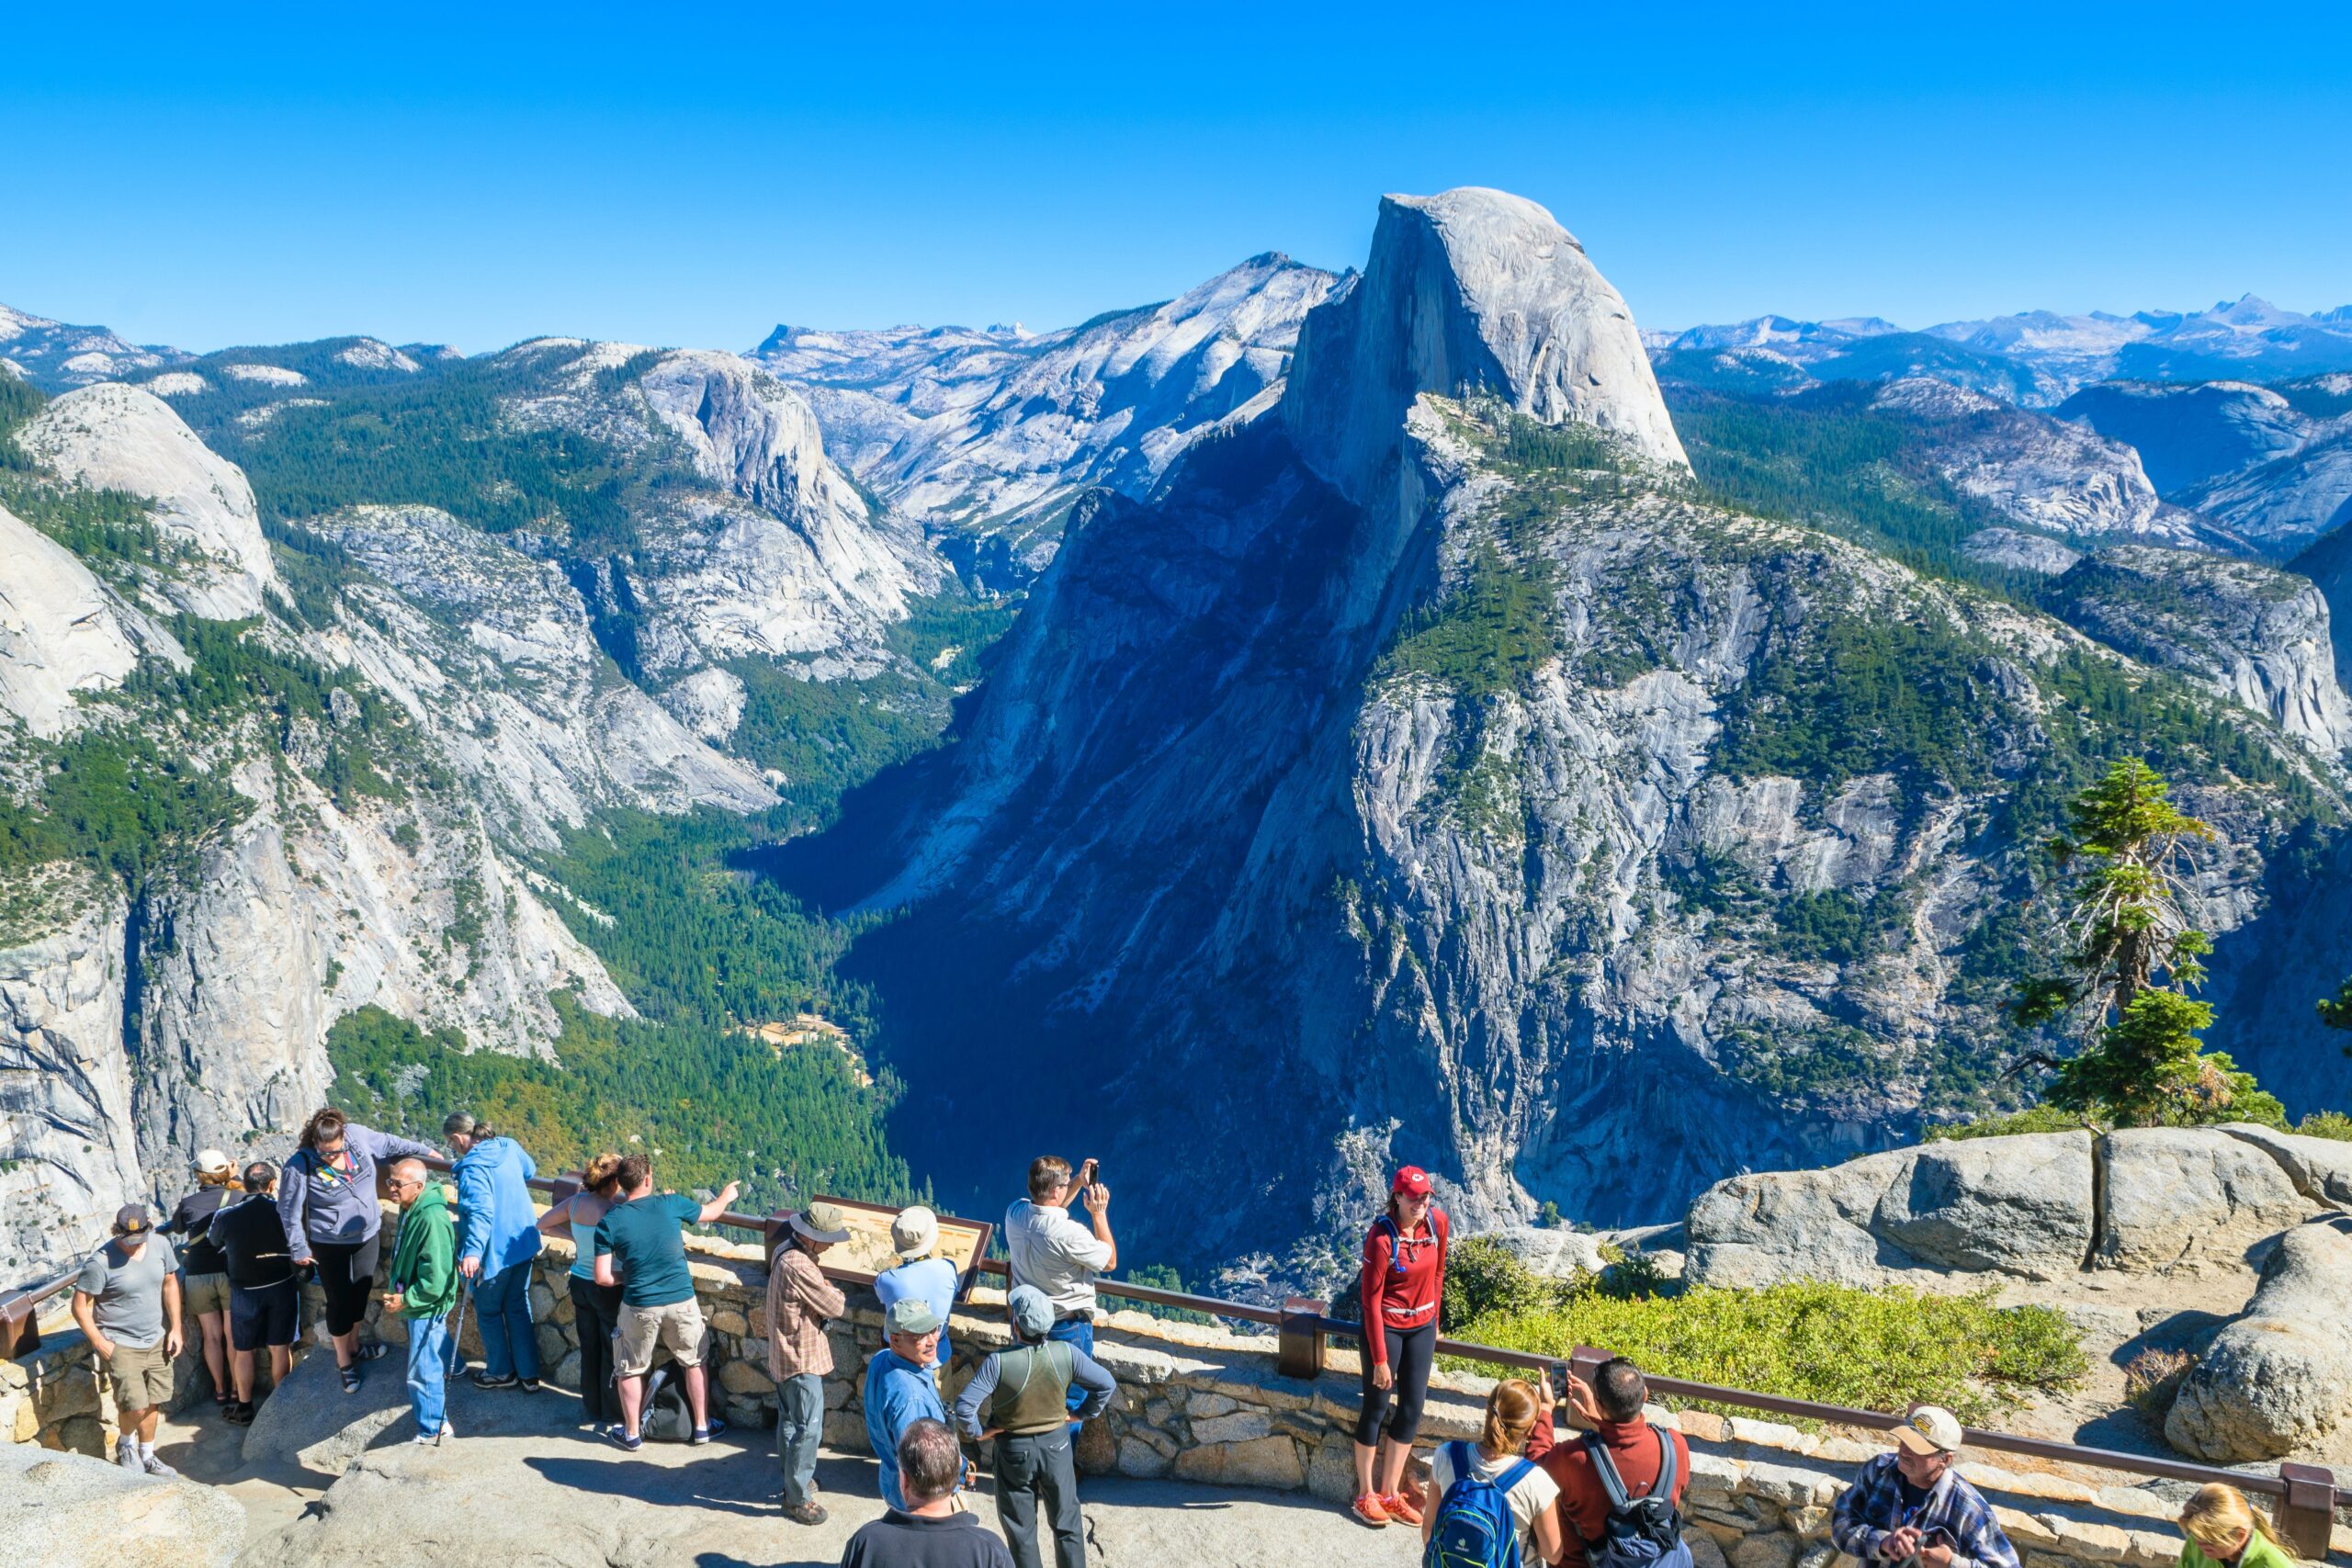 Yosemite National Park: An Outdoor Enthusiast’s Paradise – Our Personal Account